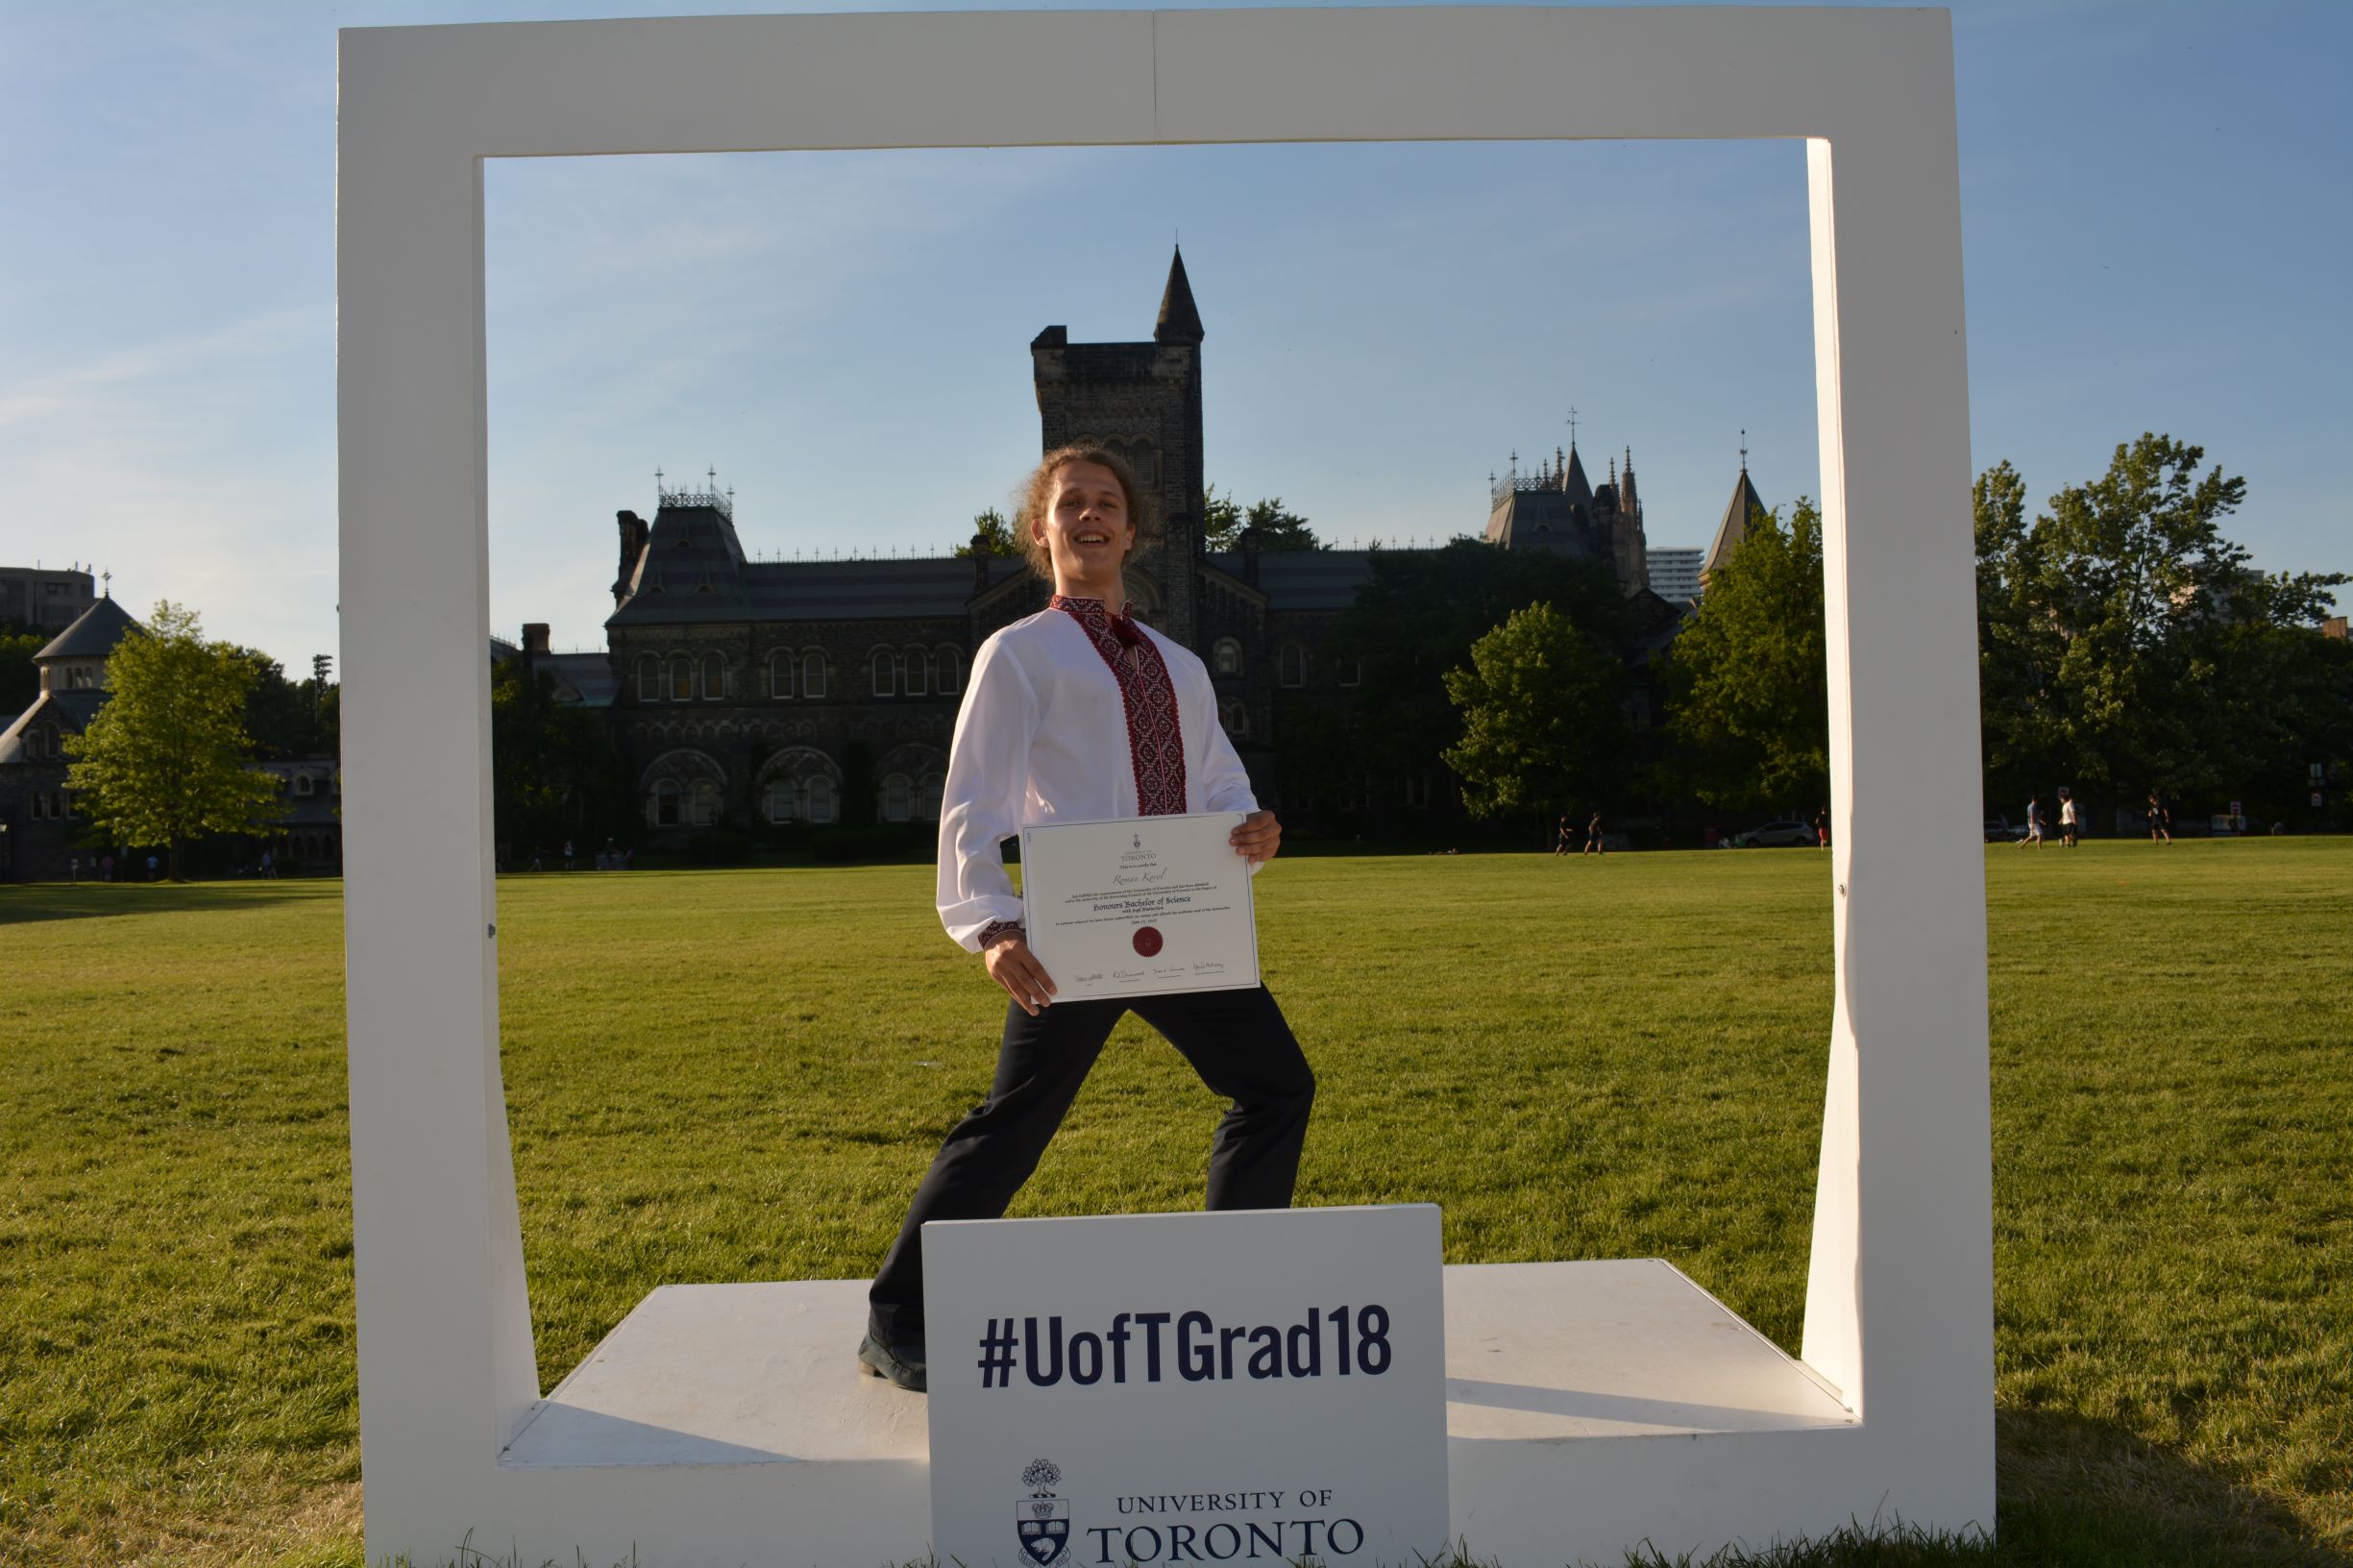 Roman inside a life sized picture frame around the University college tower of the University of Toronto. He is holding his Bachelors diploma.